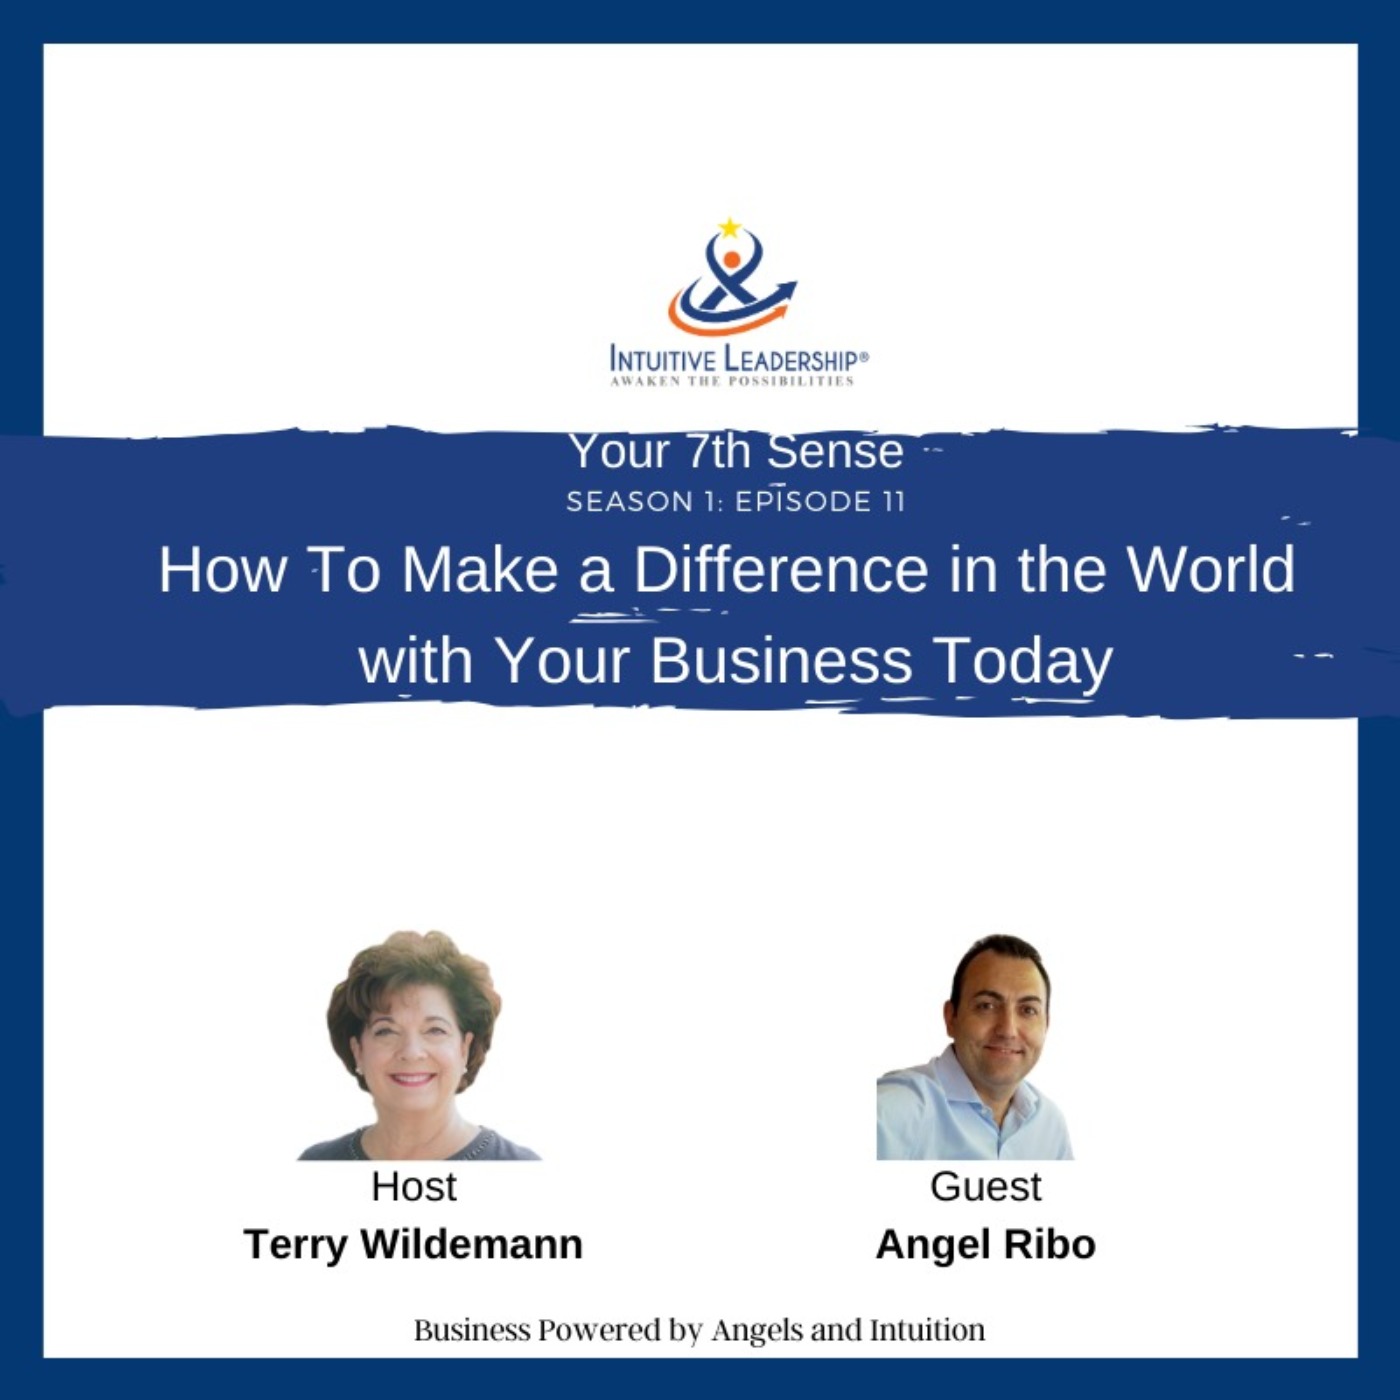 Your 7th Sense: How To Make a Difference in the World with Your Business Today (Using your Intuition)